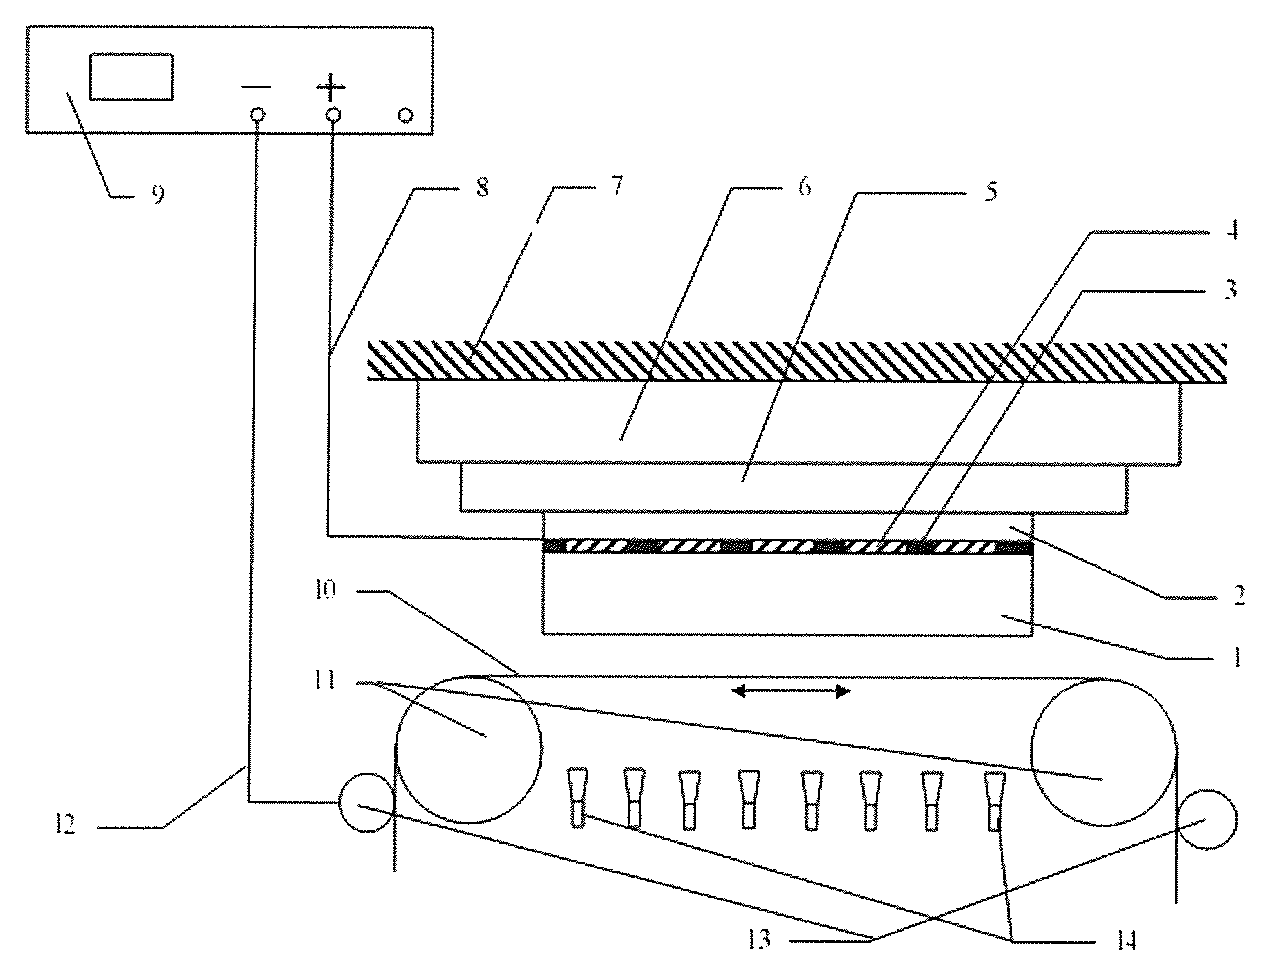 Grinding/electrolysis combined multi-wire-slicing processing method for silicon wafers